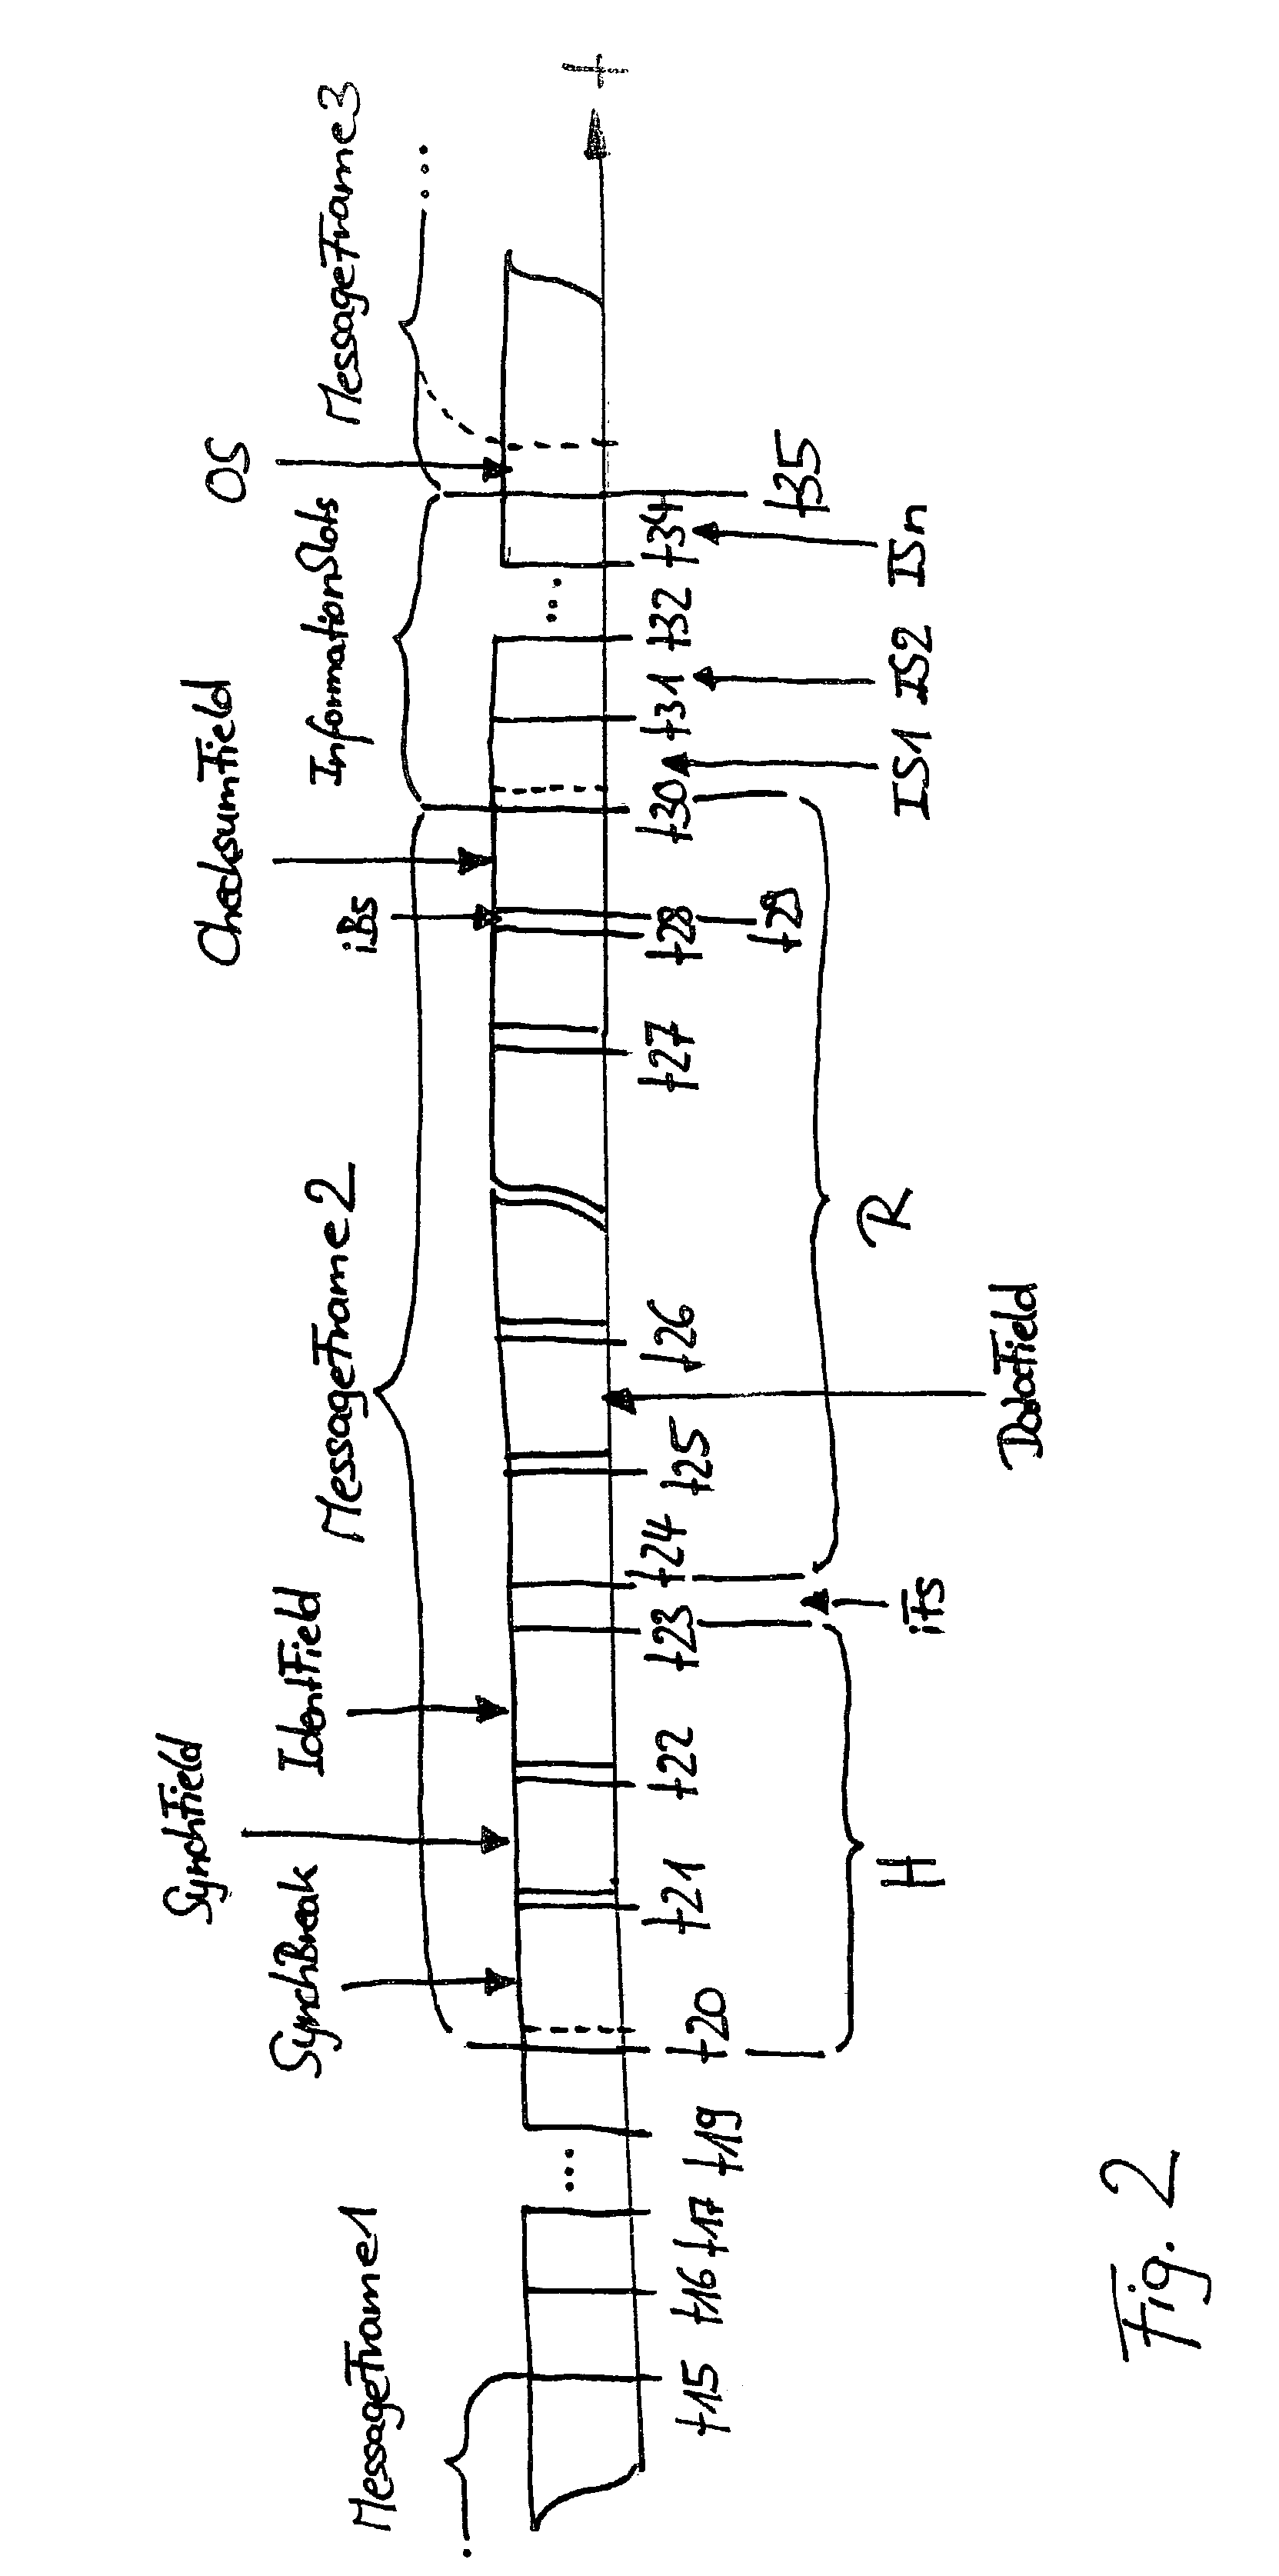 Method and device for transmitting information on a bus system, and a bus system in which different information is uniquely assigned different information identifiers